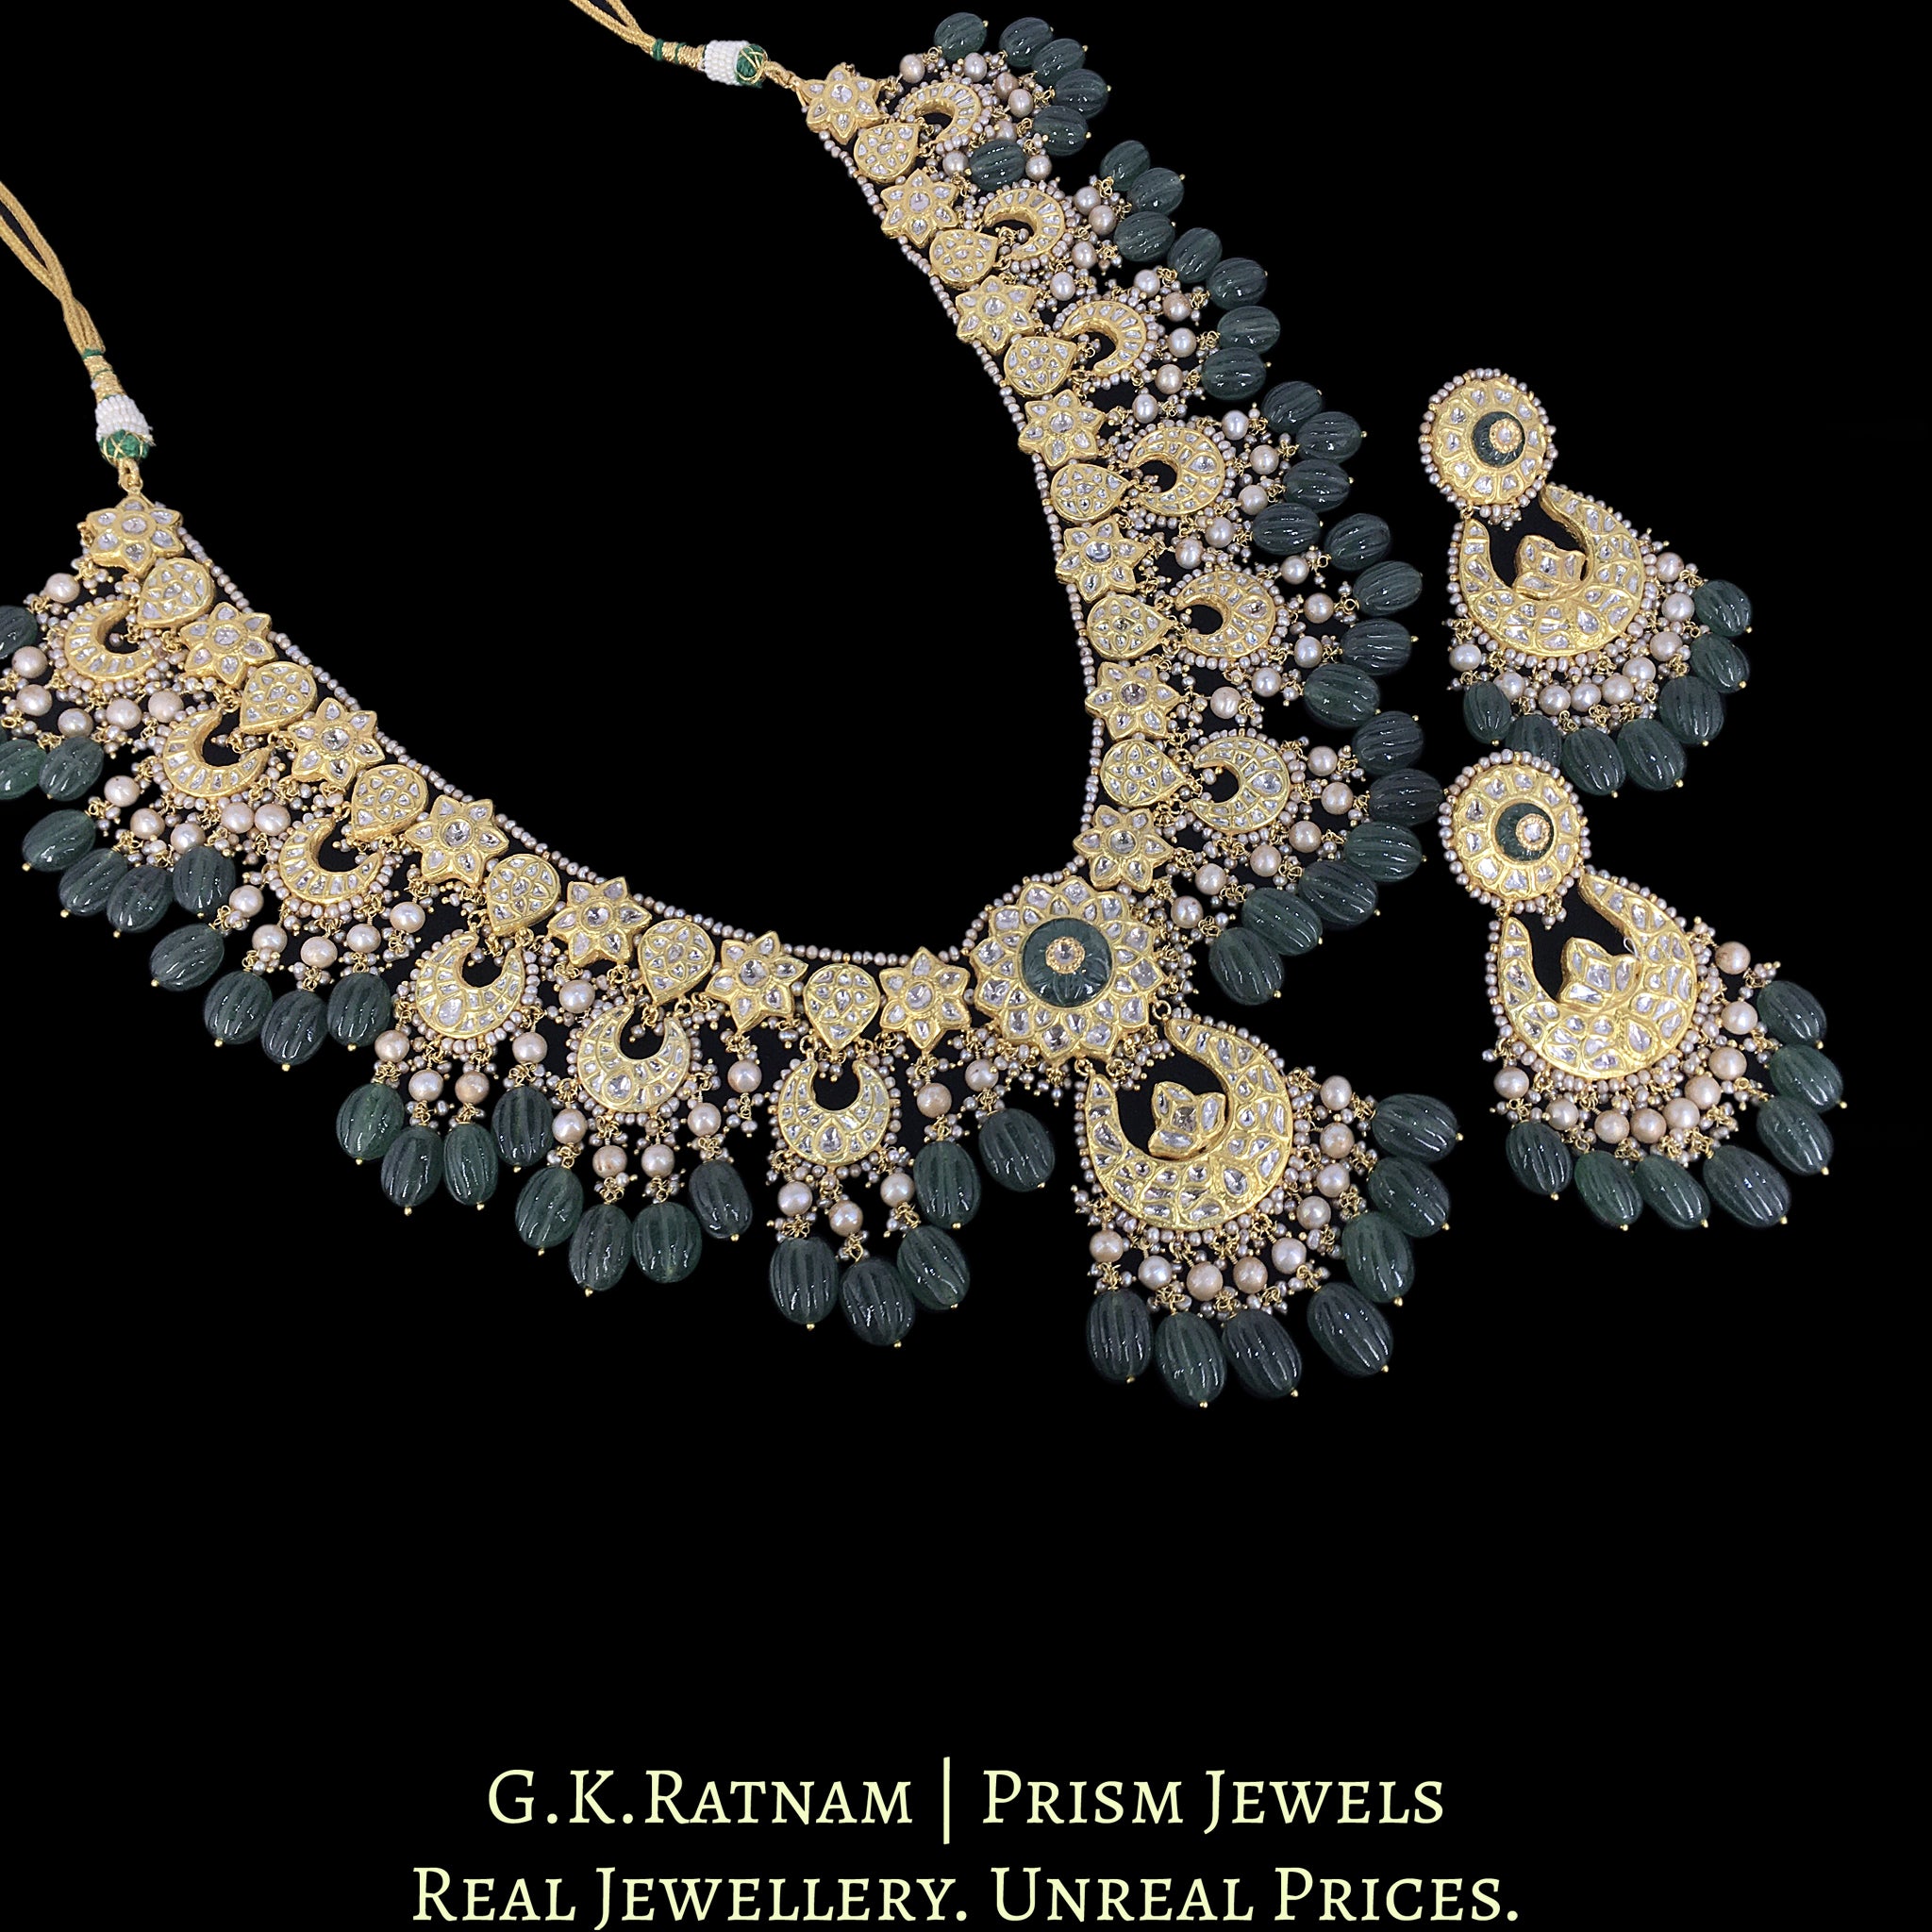 23k Gold and Diamond Polki Long Necklace Set with Antiqued Freshwater Pearls and Strawberry Quartz Melons